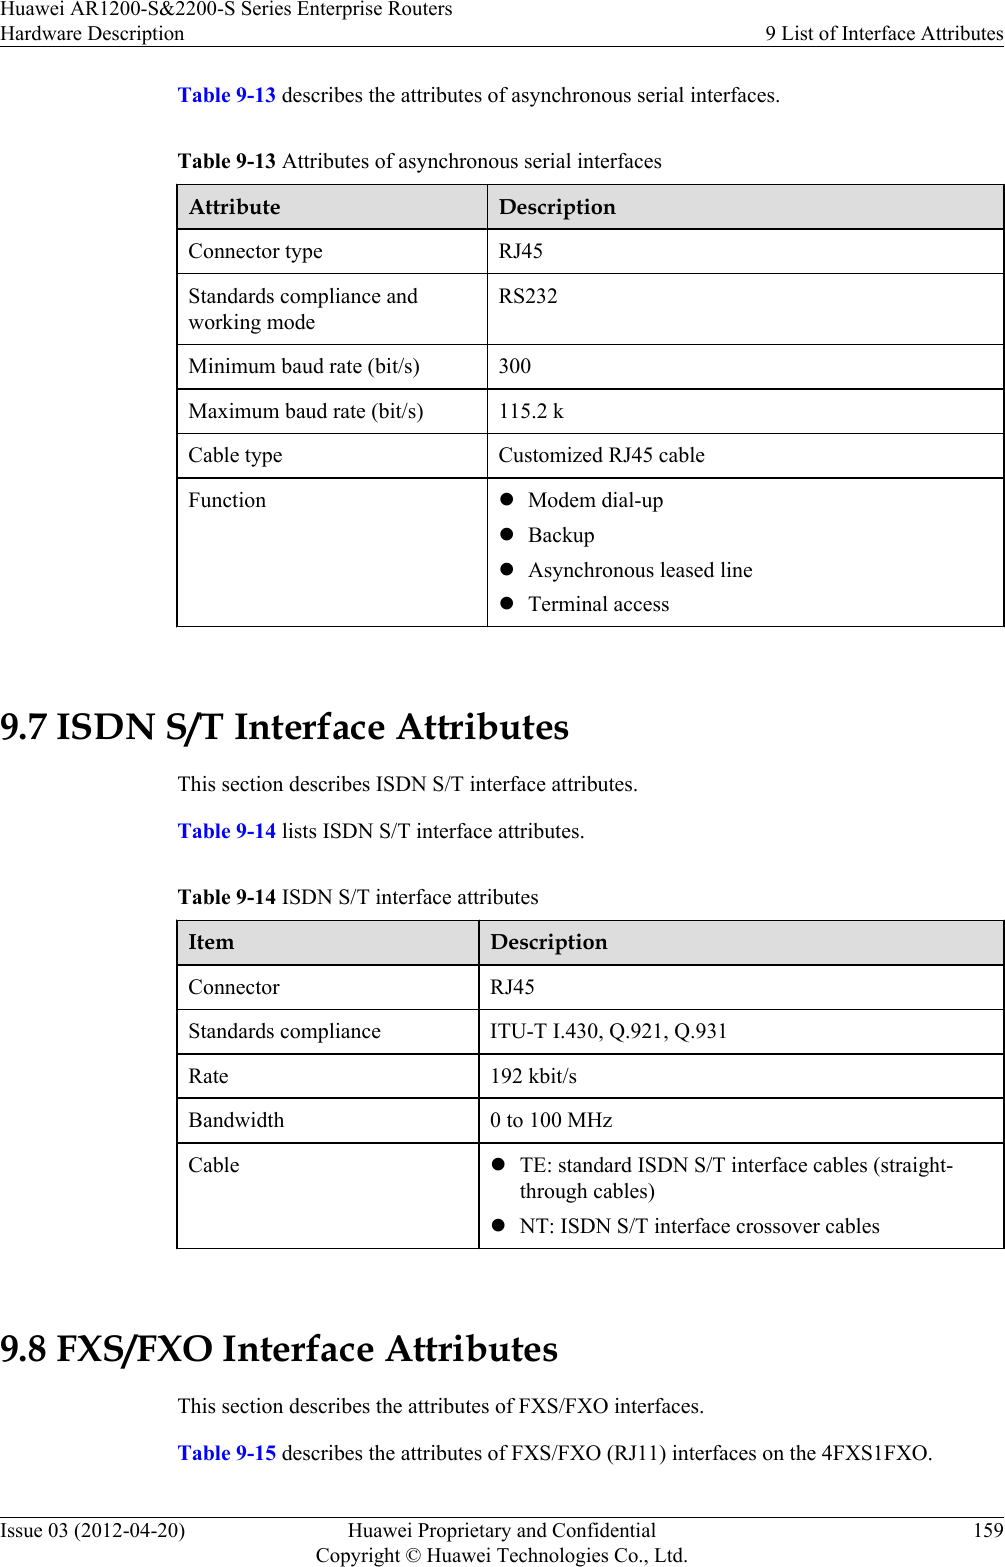 Table 9-13 describes the attributes of asynchronous serial interfaces.Table 9-13 Attributes of asynchronous serial interfacesAttribute DescriptionConnector type RJ45Standards compliance andworking modeRS232Minimum baud rate (bit/s) 300Maximum baud rate (bit/s) 115.2 kCable type Customized RJ45 cableFunction lModem dial-uplBackuplAsynchronous leased linelTerminal access 9.7 ISDN S/T Interface AttributesThis section describes ISDN S/T interface attributes.Table 9-14 lists ISDN S/T interface attributes.Table 9-14 ISDN S/T interface attributesItem DescriptionConnector RJ45Standards compliance ITU-T I.430, Q.921, Q.931Rate 192 kbit/sBandwidth 0 to 100 MHzCable lTE: standard ISDN S/T interface cables (straight-through cables)lNT: ISDN S/T interface crossover cables 9.8 FXS/FXO Interface AttributesThis section describes the attributes of FXS/FXO interfaces.Table 9-15 describes the attributes of FXS/FXO (RJ11) interfaces on the 4FXS1FXO.Huawei AR1200-S&amp;2200-S Series Enterprise RoutersHardware Description 9 List of Interface AttributesIssue 03 (2012-04-20) Huawei Proprietary and ConfidentialCopyright © Huawei Technologies Co., Ltd.159